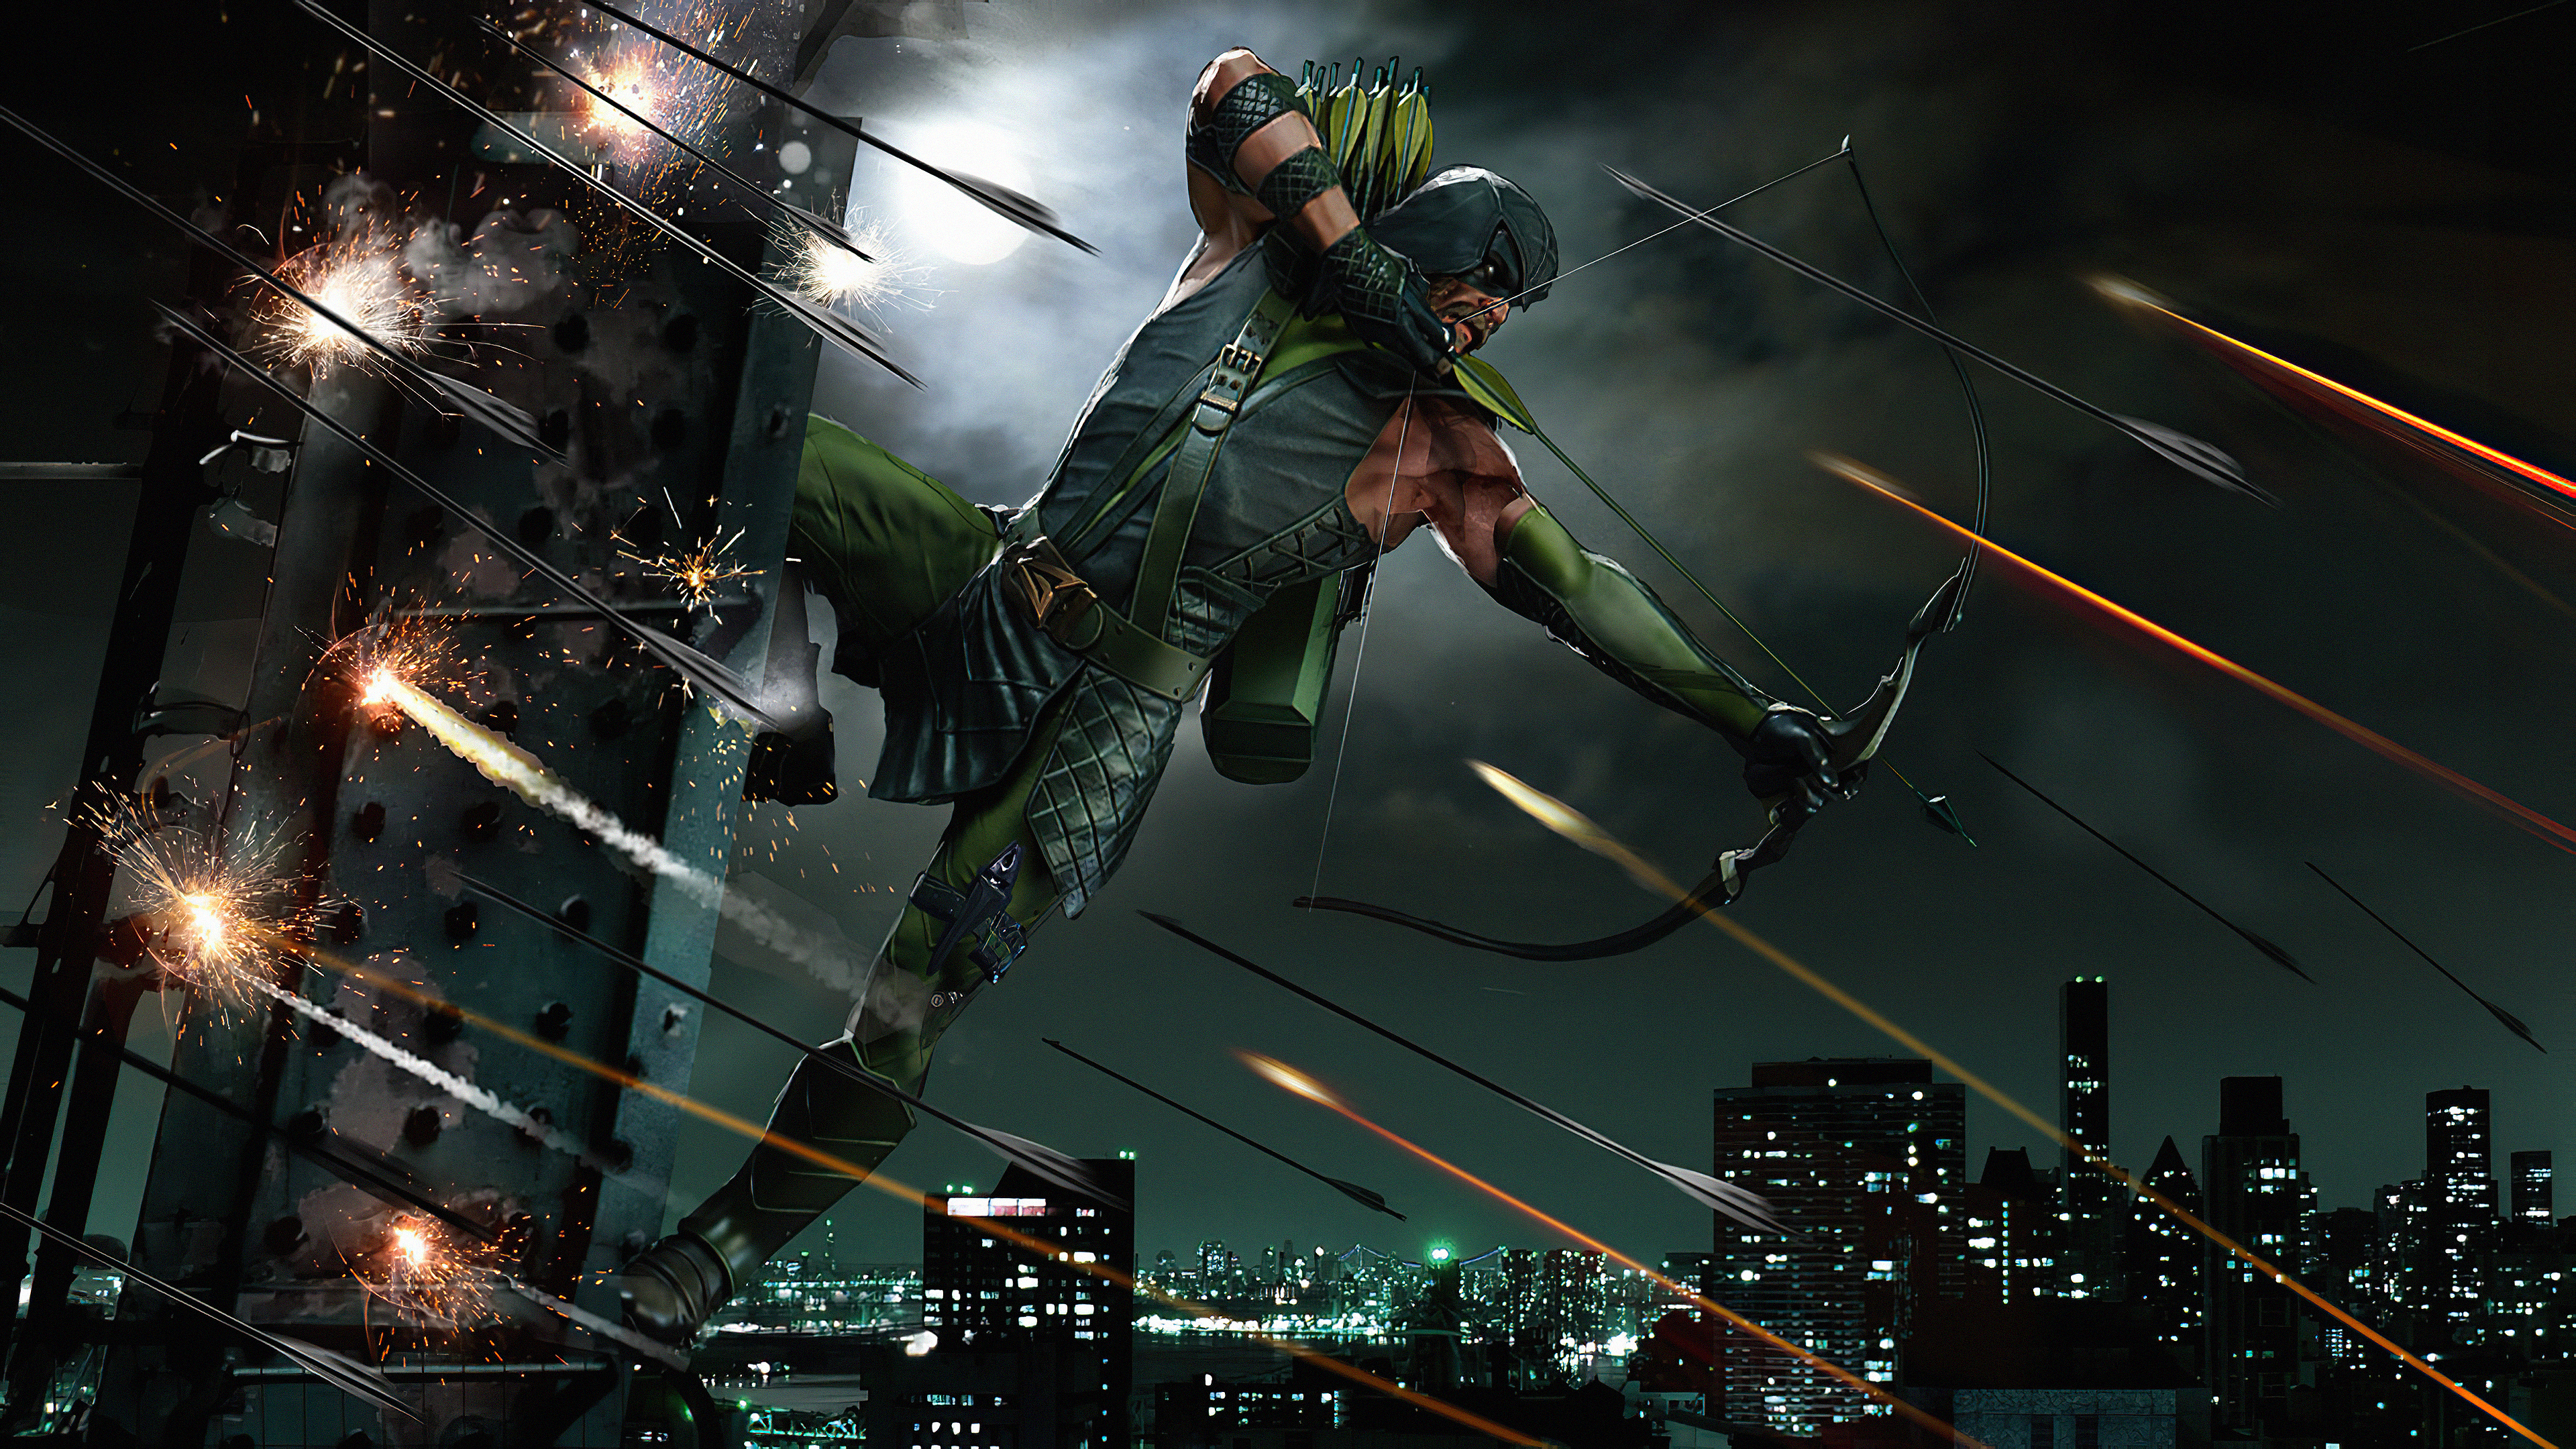 Green Arrow Bow Hd Superheroes 4k Wallpapers Images Backgrounds Photos And Pictures We have a massive amount of hd images that will make your computer or each of our wallpapers can be downloaded to fit almost any device, no matter if you're running an android phone, iphone, tablet or pc. green arrow bow hd superheroes 4k